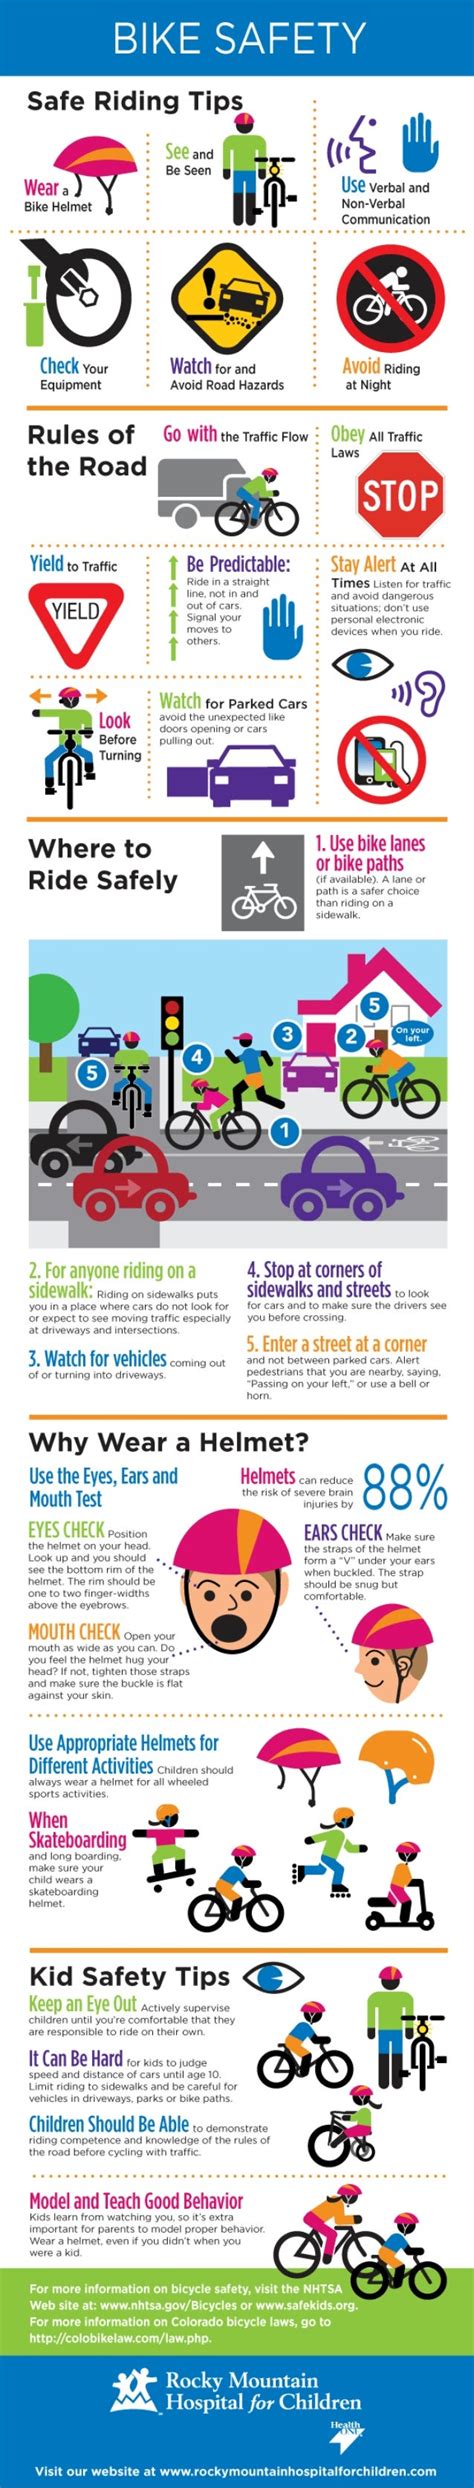 Rocky Mountain Hospital For Children Bike Safety Infographic